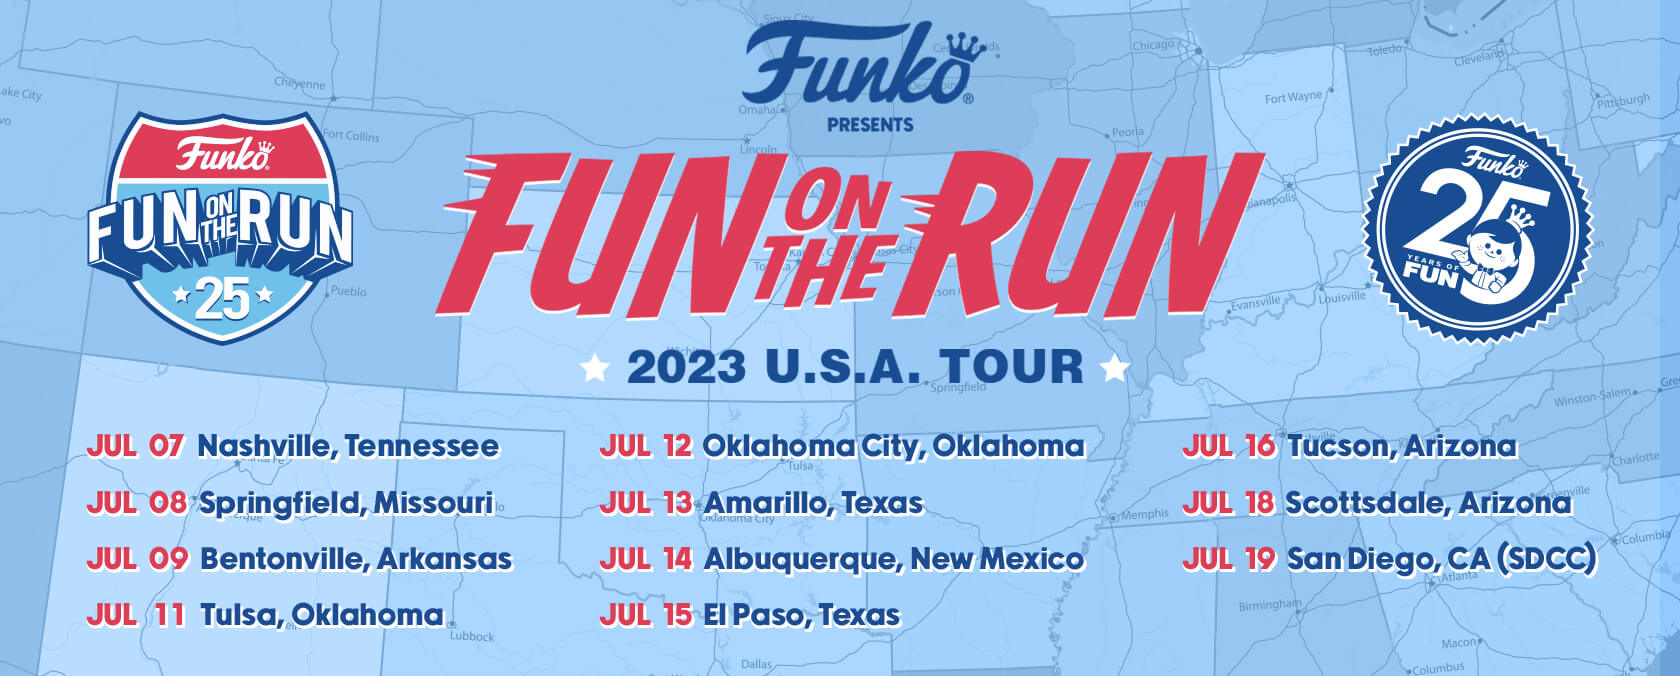 Fun on the Run Funko Events Poster with Dates